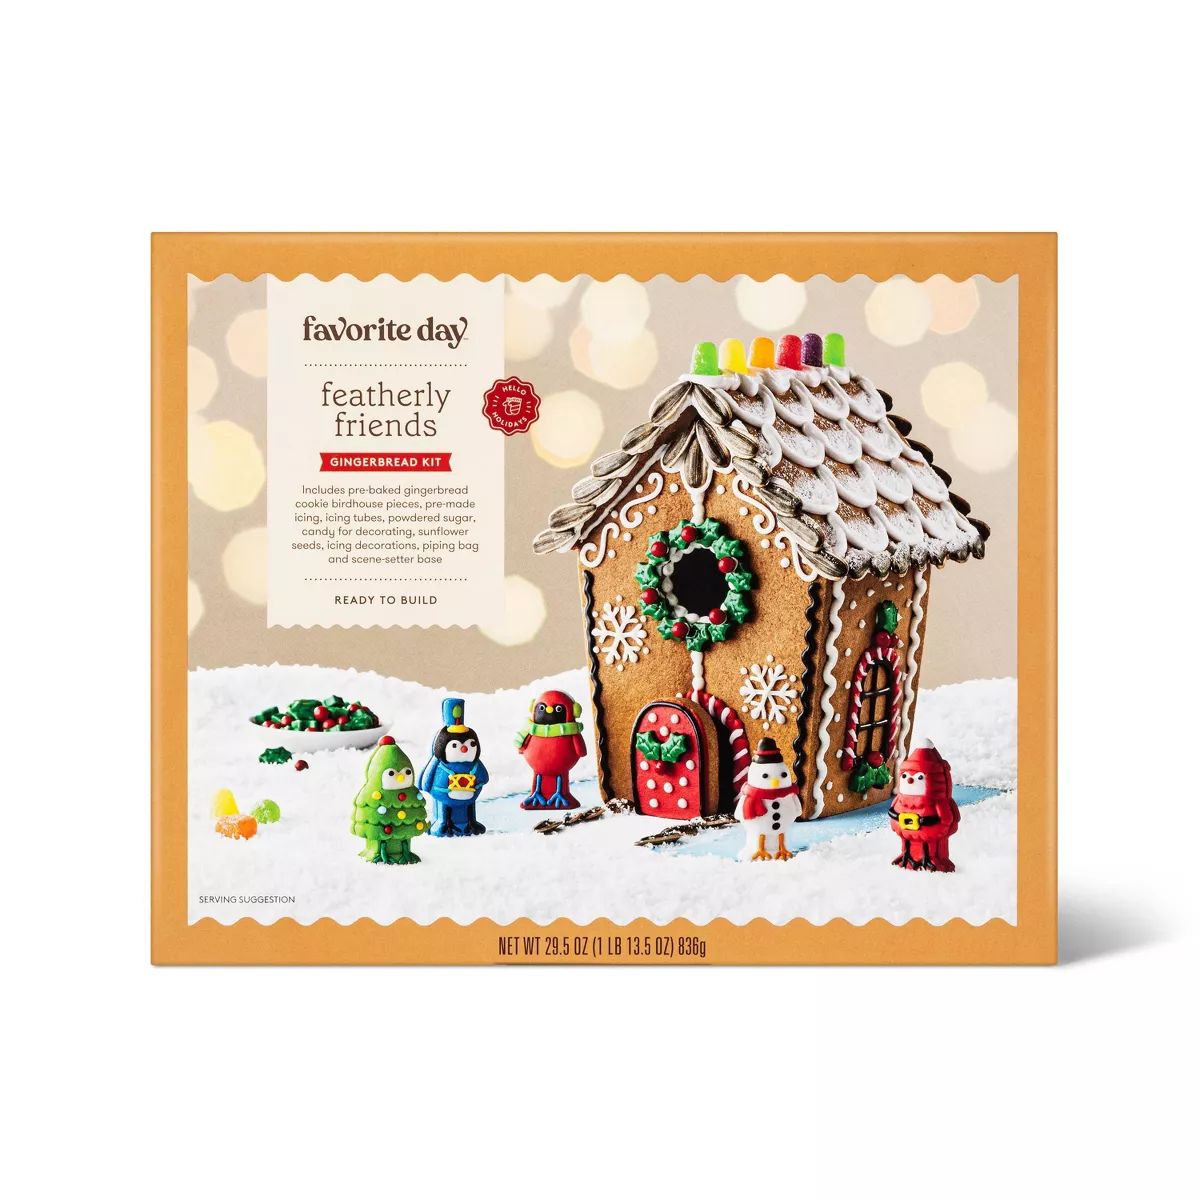 Holiday Featherly Friends Gingerbread House Kitt - 27.36oz - Favorite Day™ | Target